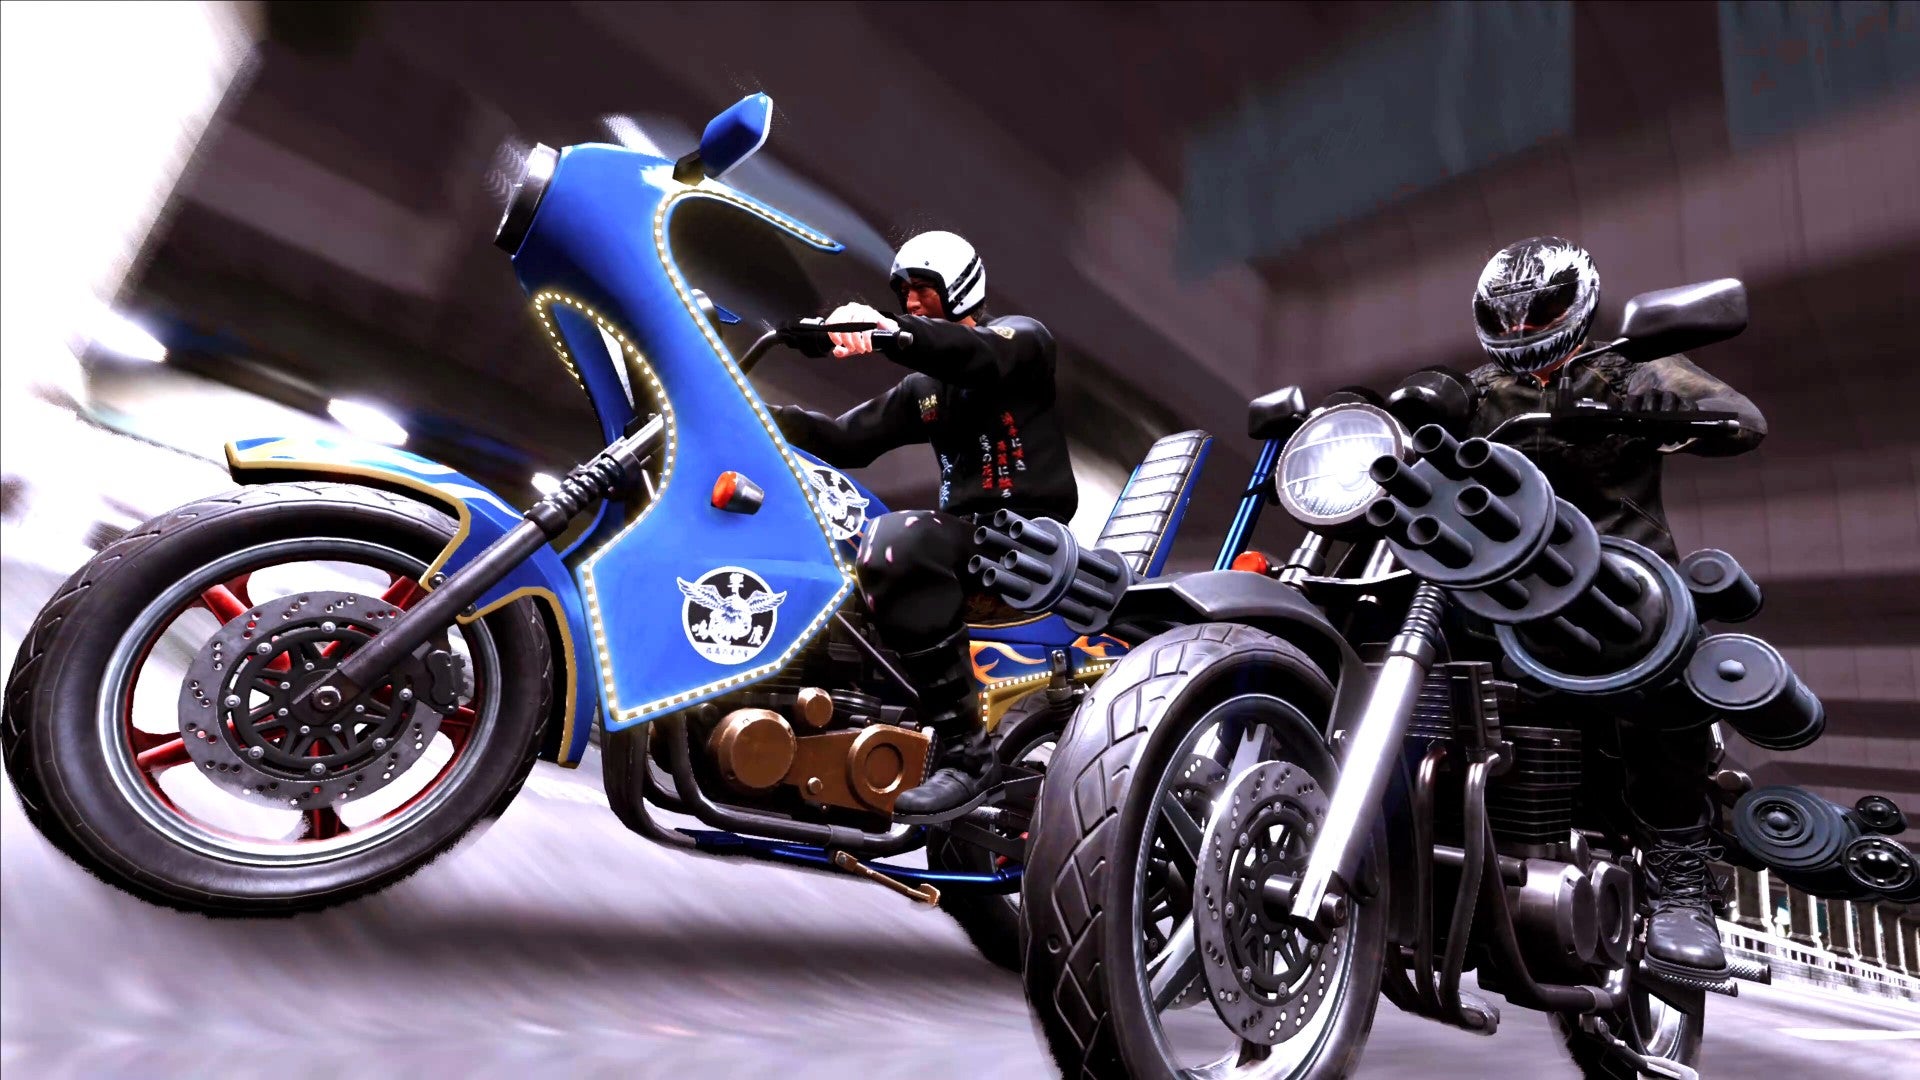 Lost Judgment's Yagami lines his blue motorbike up against a rival whose motorbike sports a mini-gun on its side.